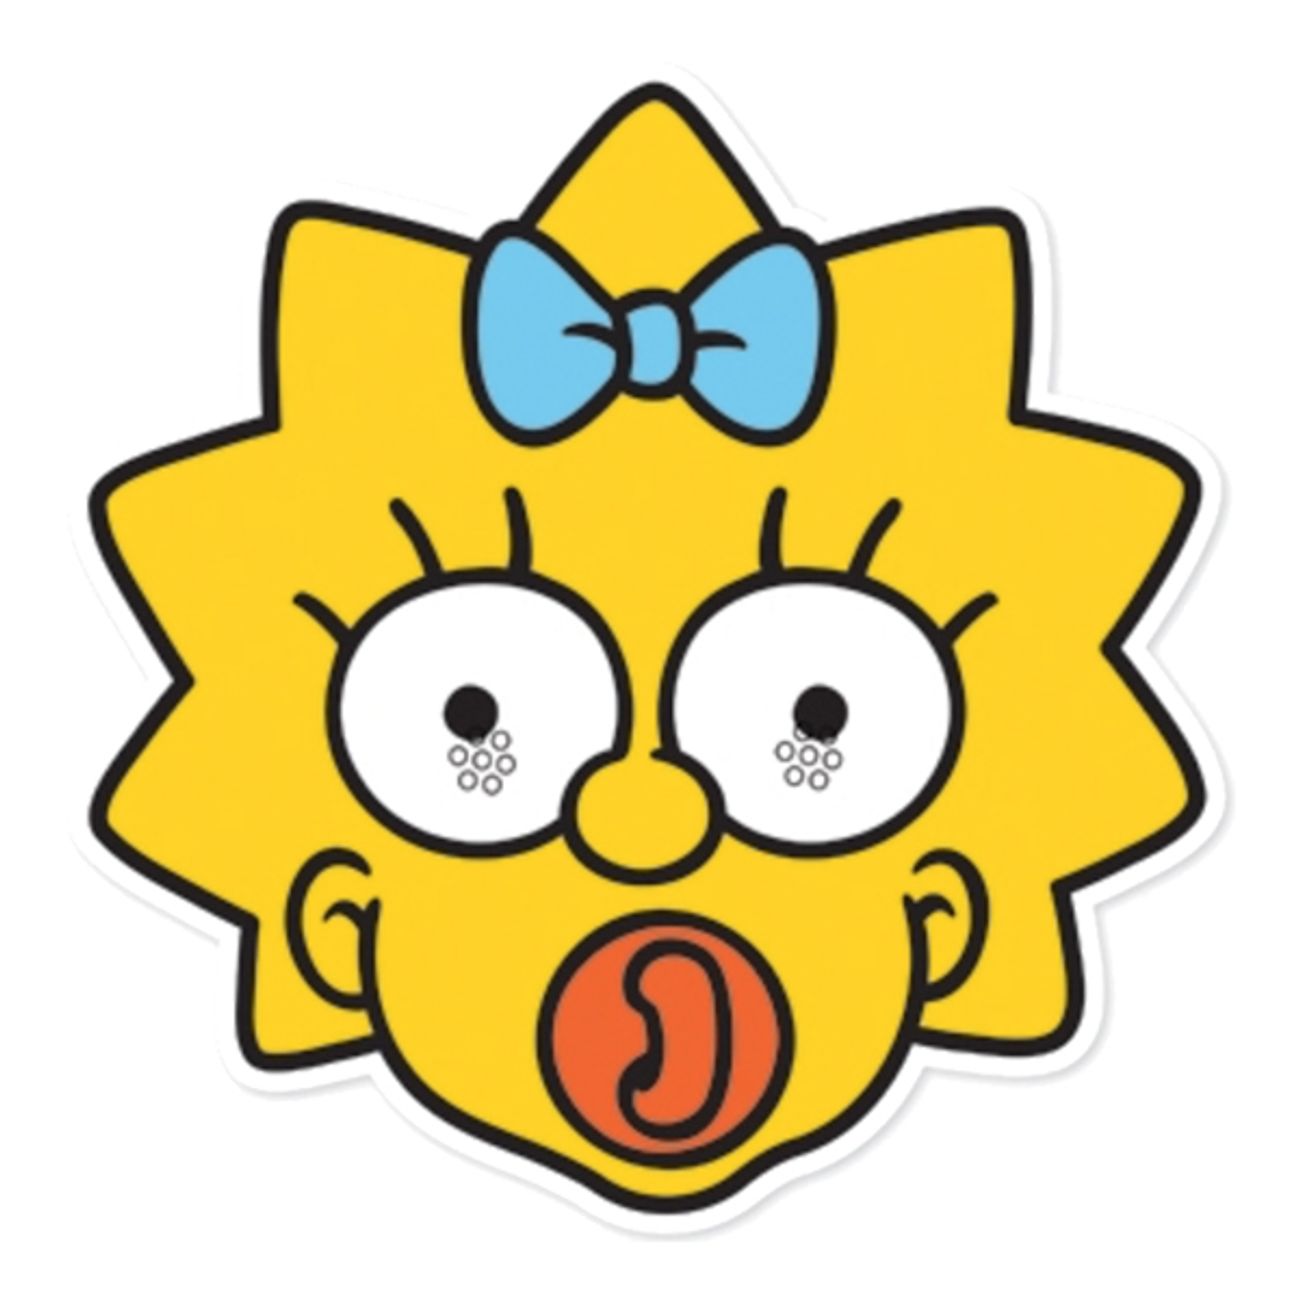 maggie-simpson-pappmask-1